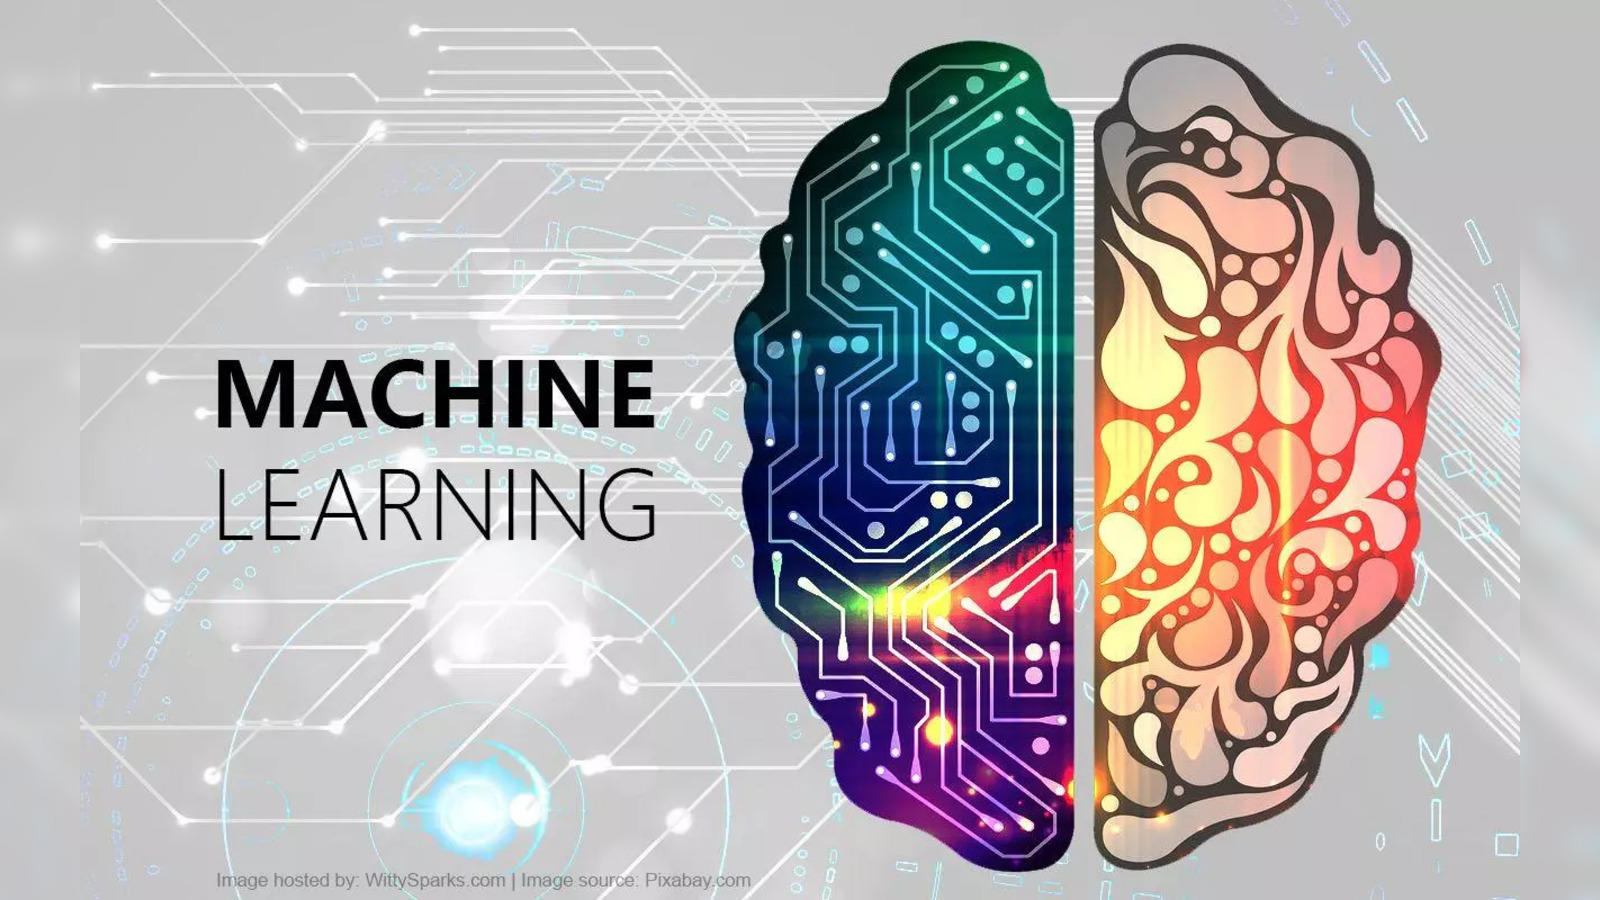 Machine Learning by Tom M Mitchell International Edition